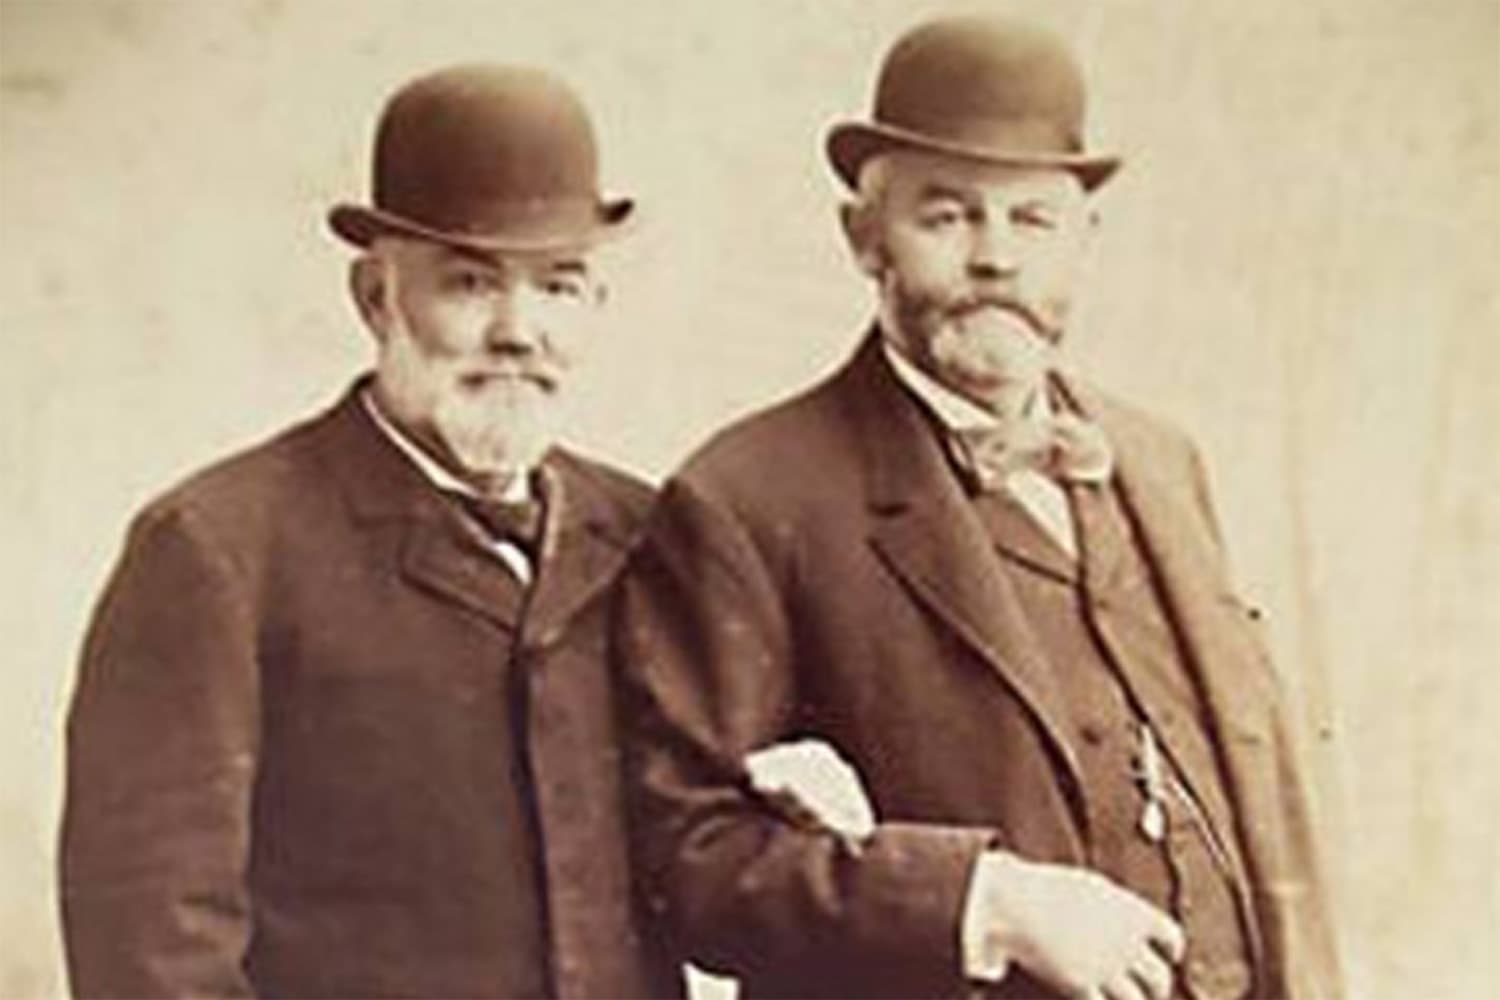 Two unidentified men pose in a photograph in this undated archival photograph. (Flickr/Varones)